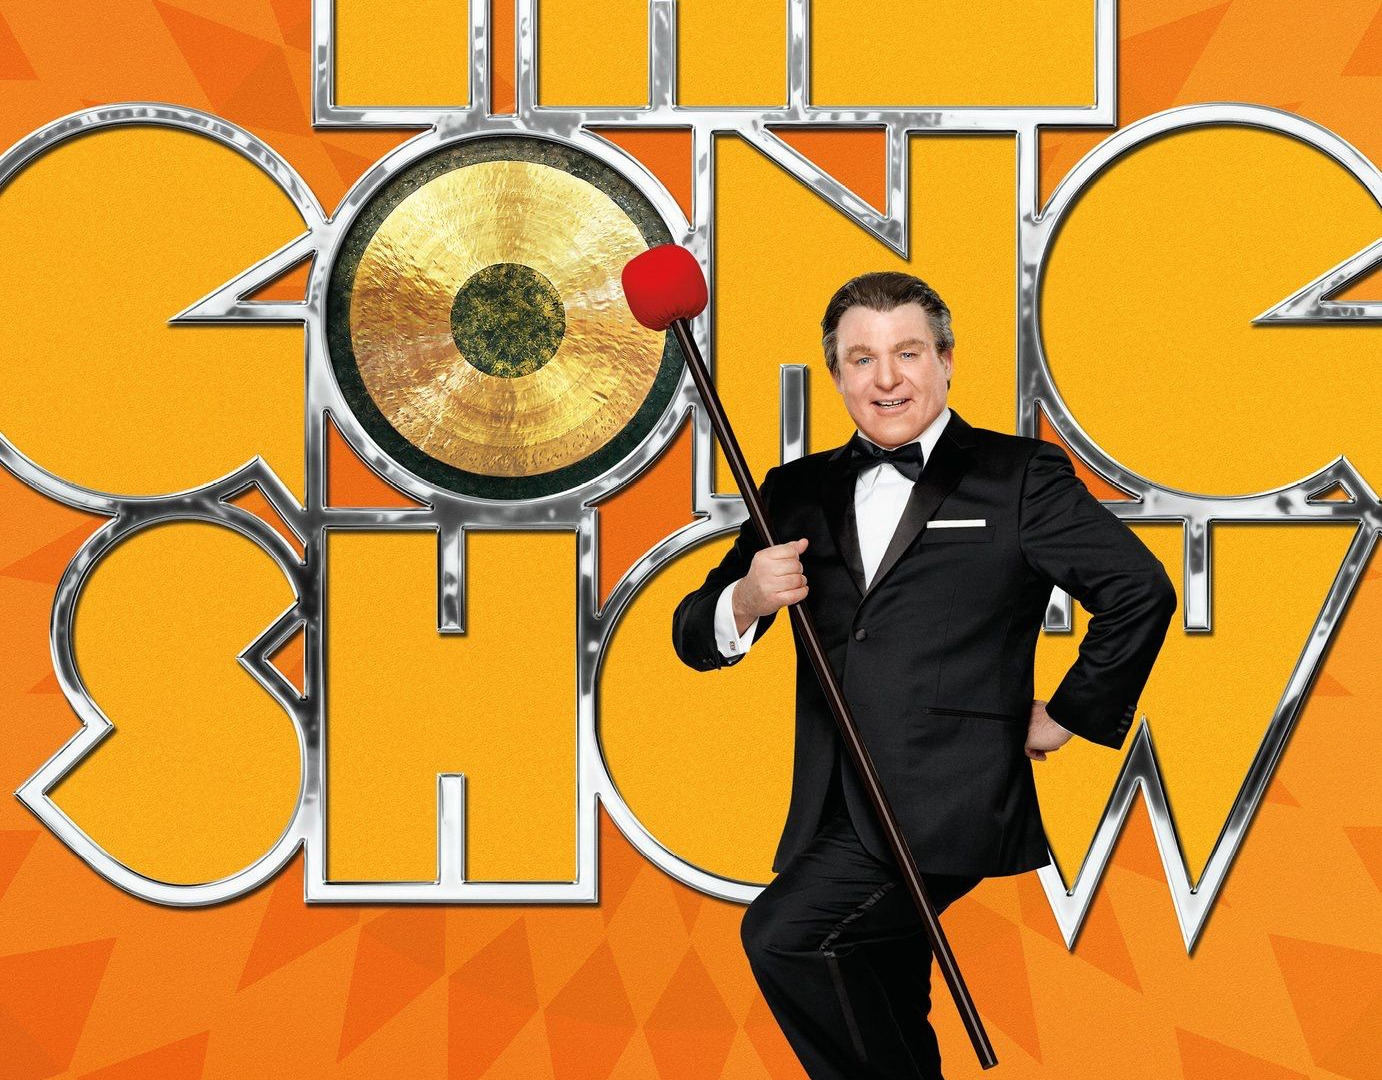 Show The Gong Show